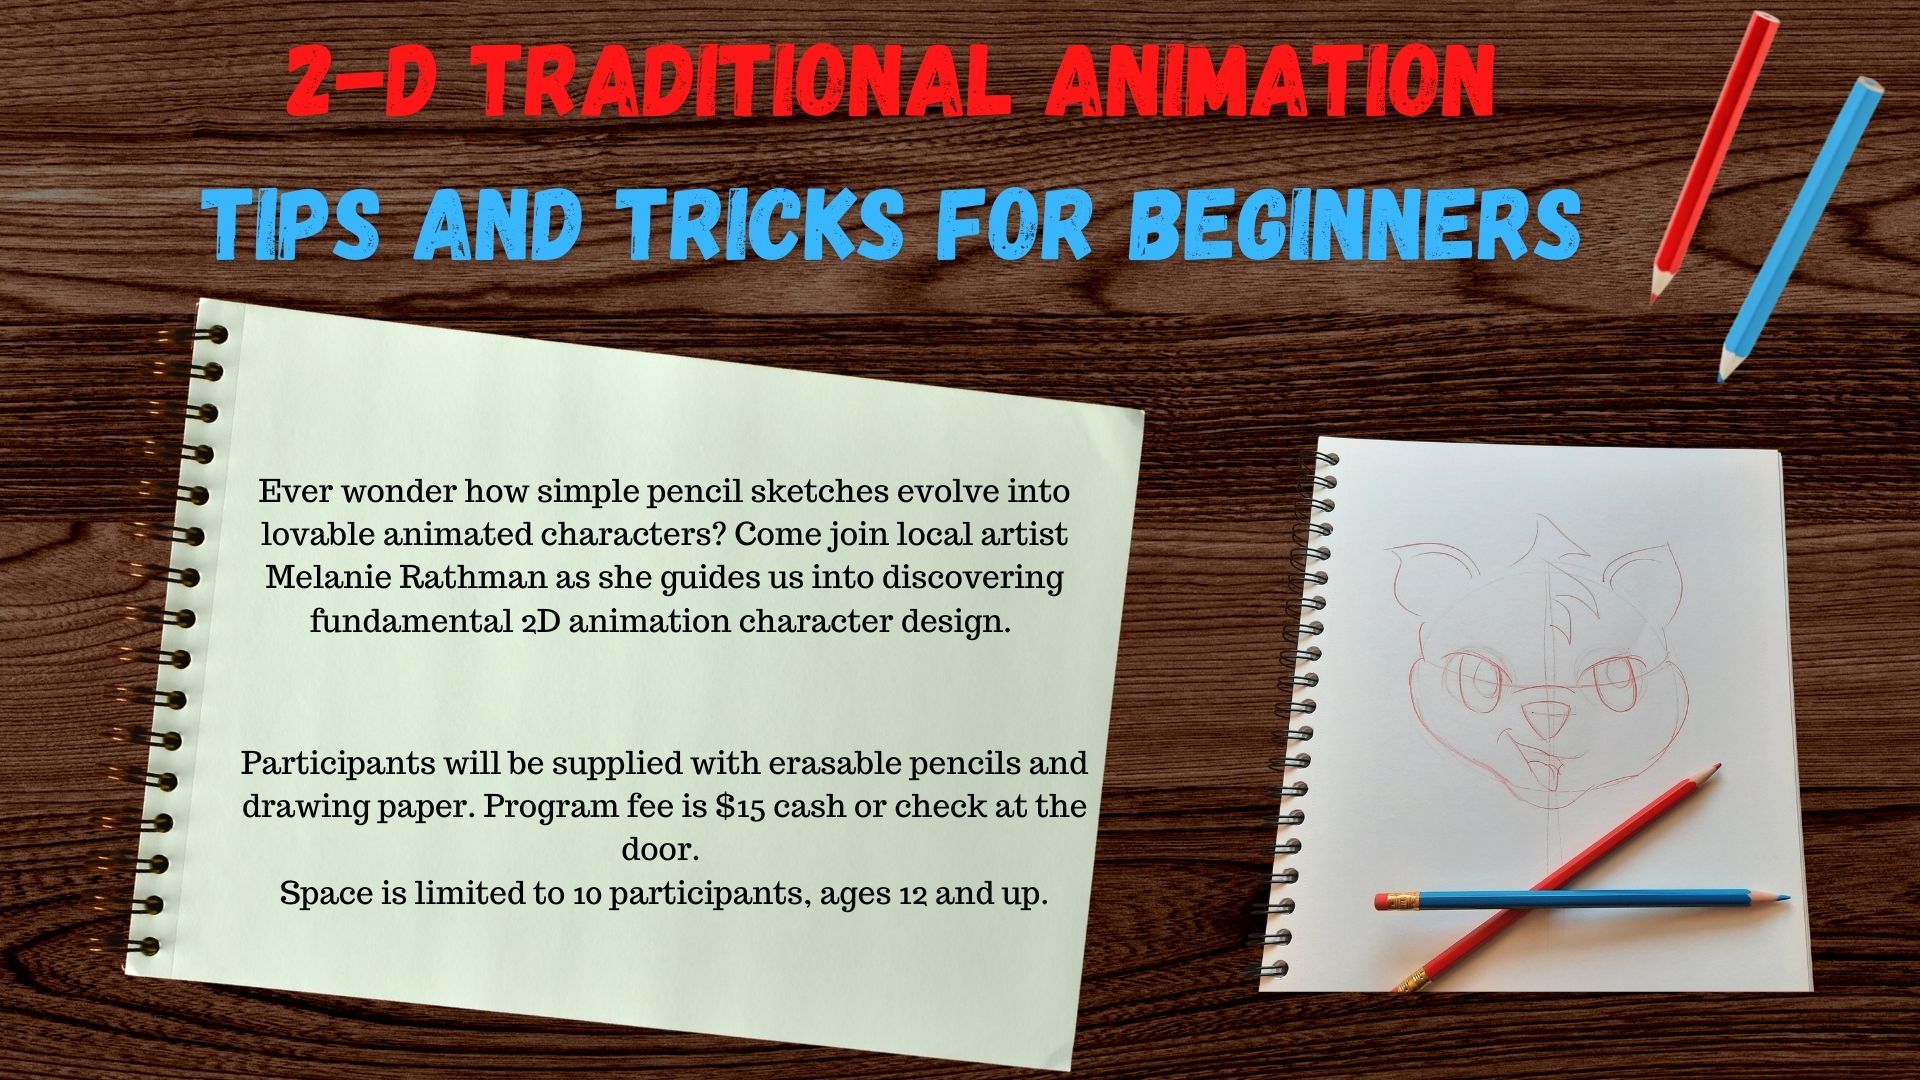 Flyer for 2D Traditional Animation program